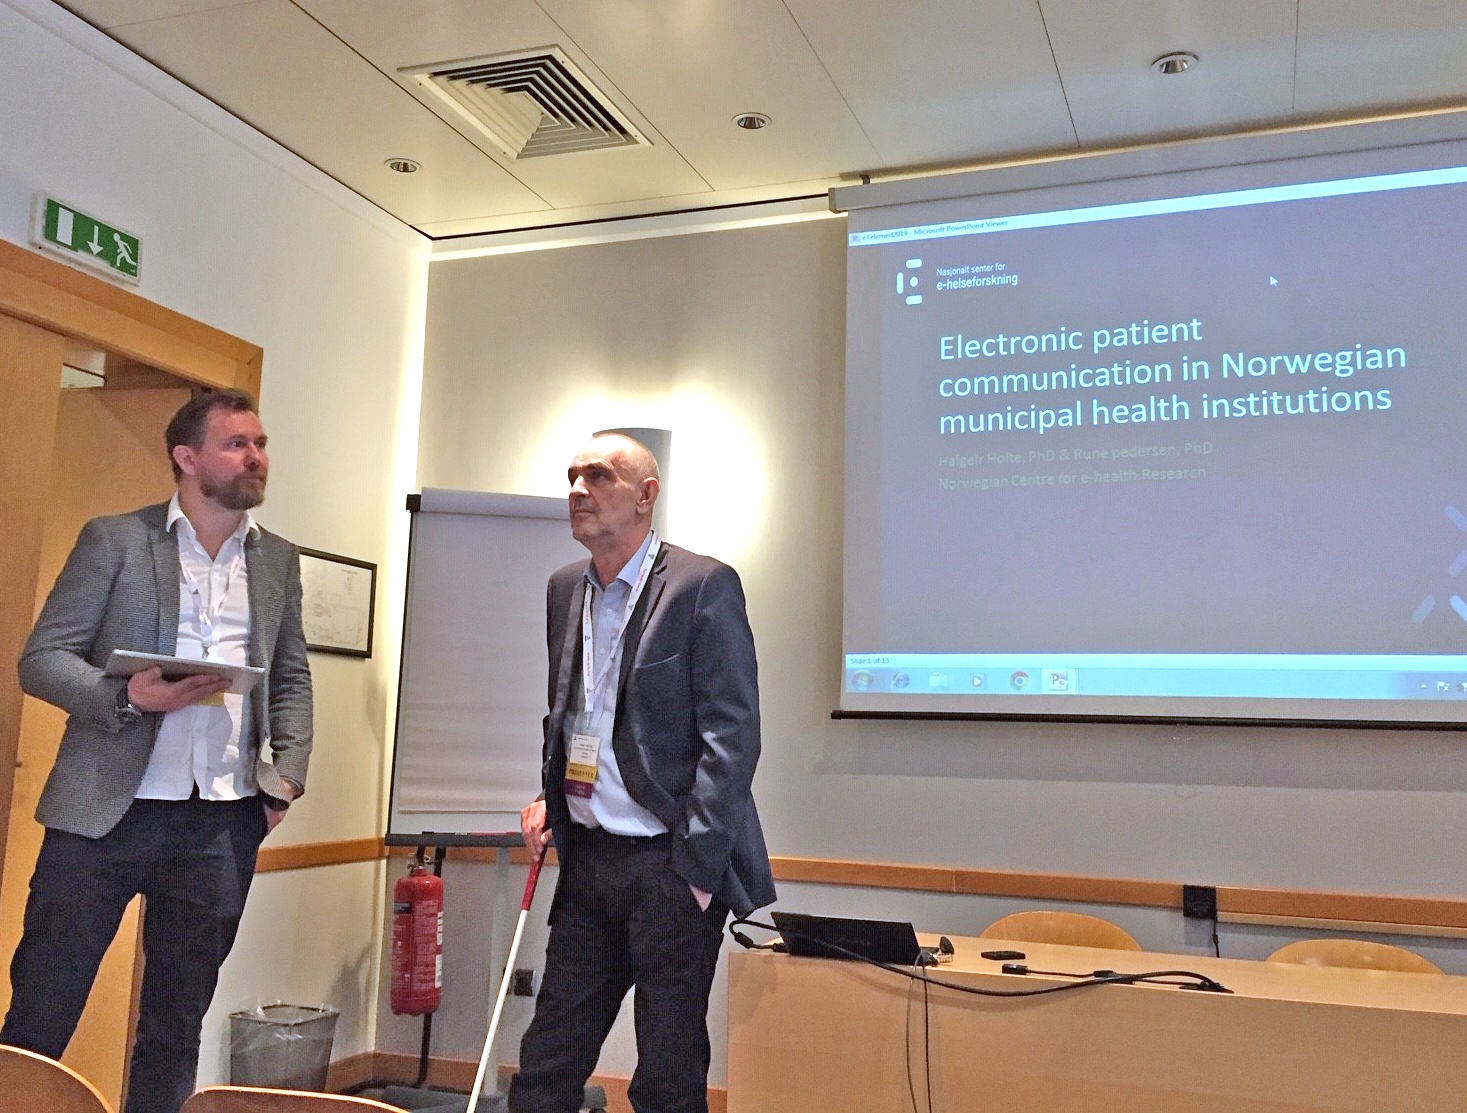 From left: Rune Pedersen and Halgeir Holthe, Norwegian Centre for E-health Research.